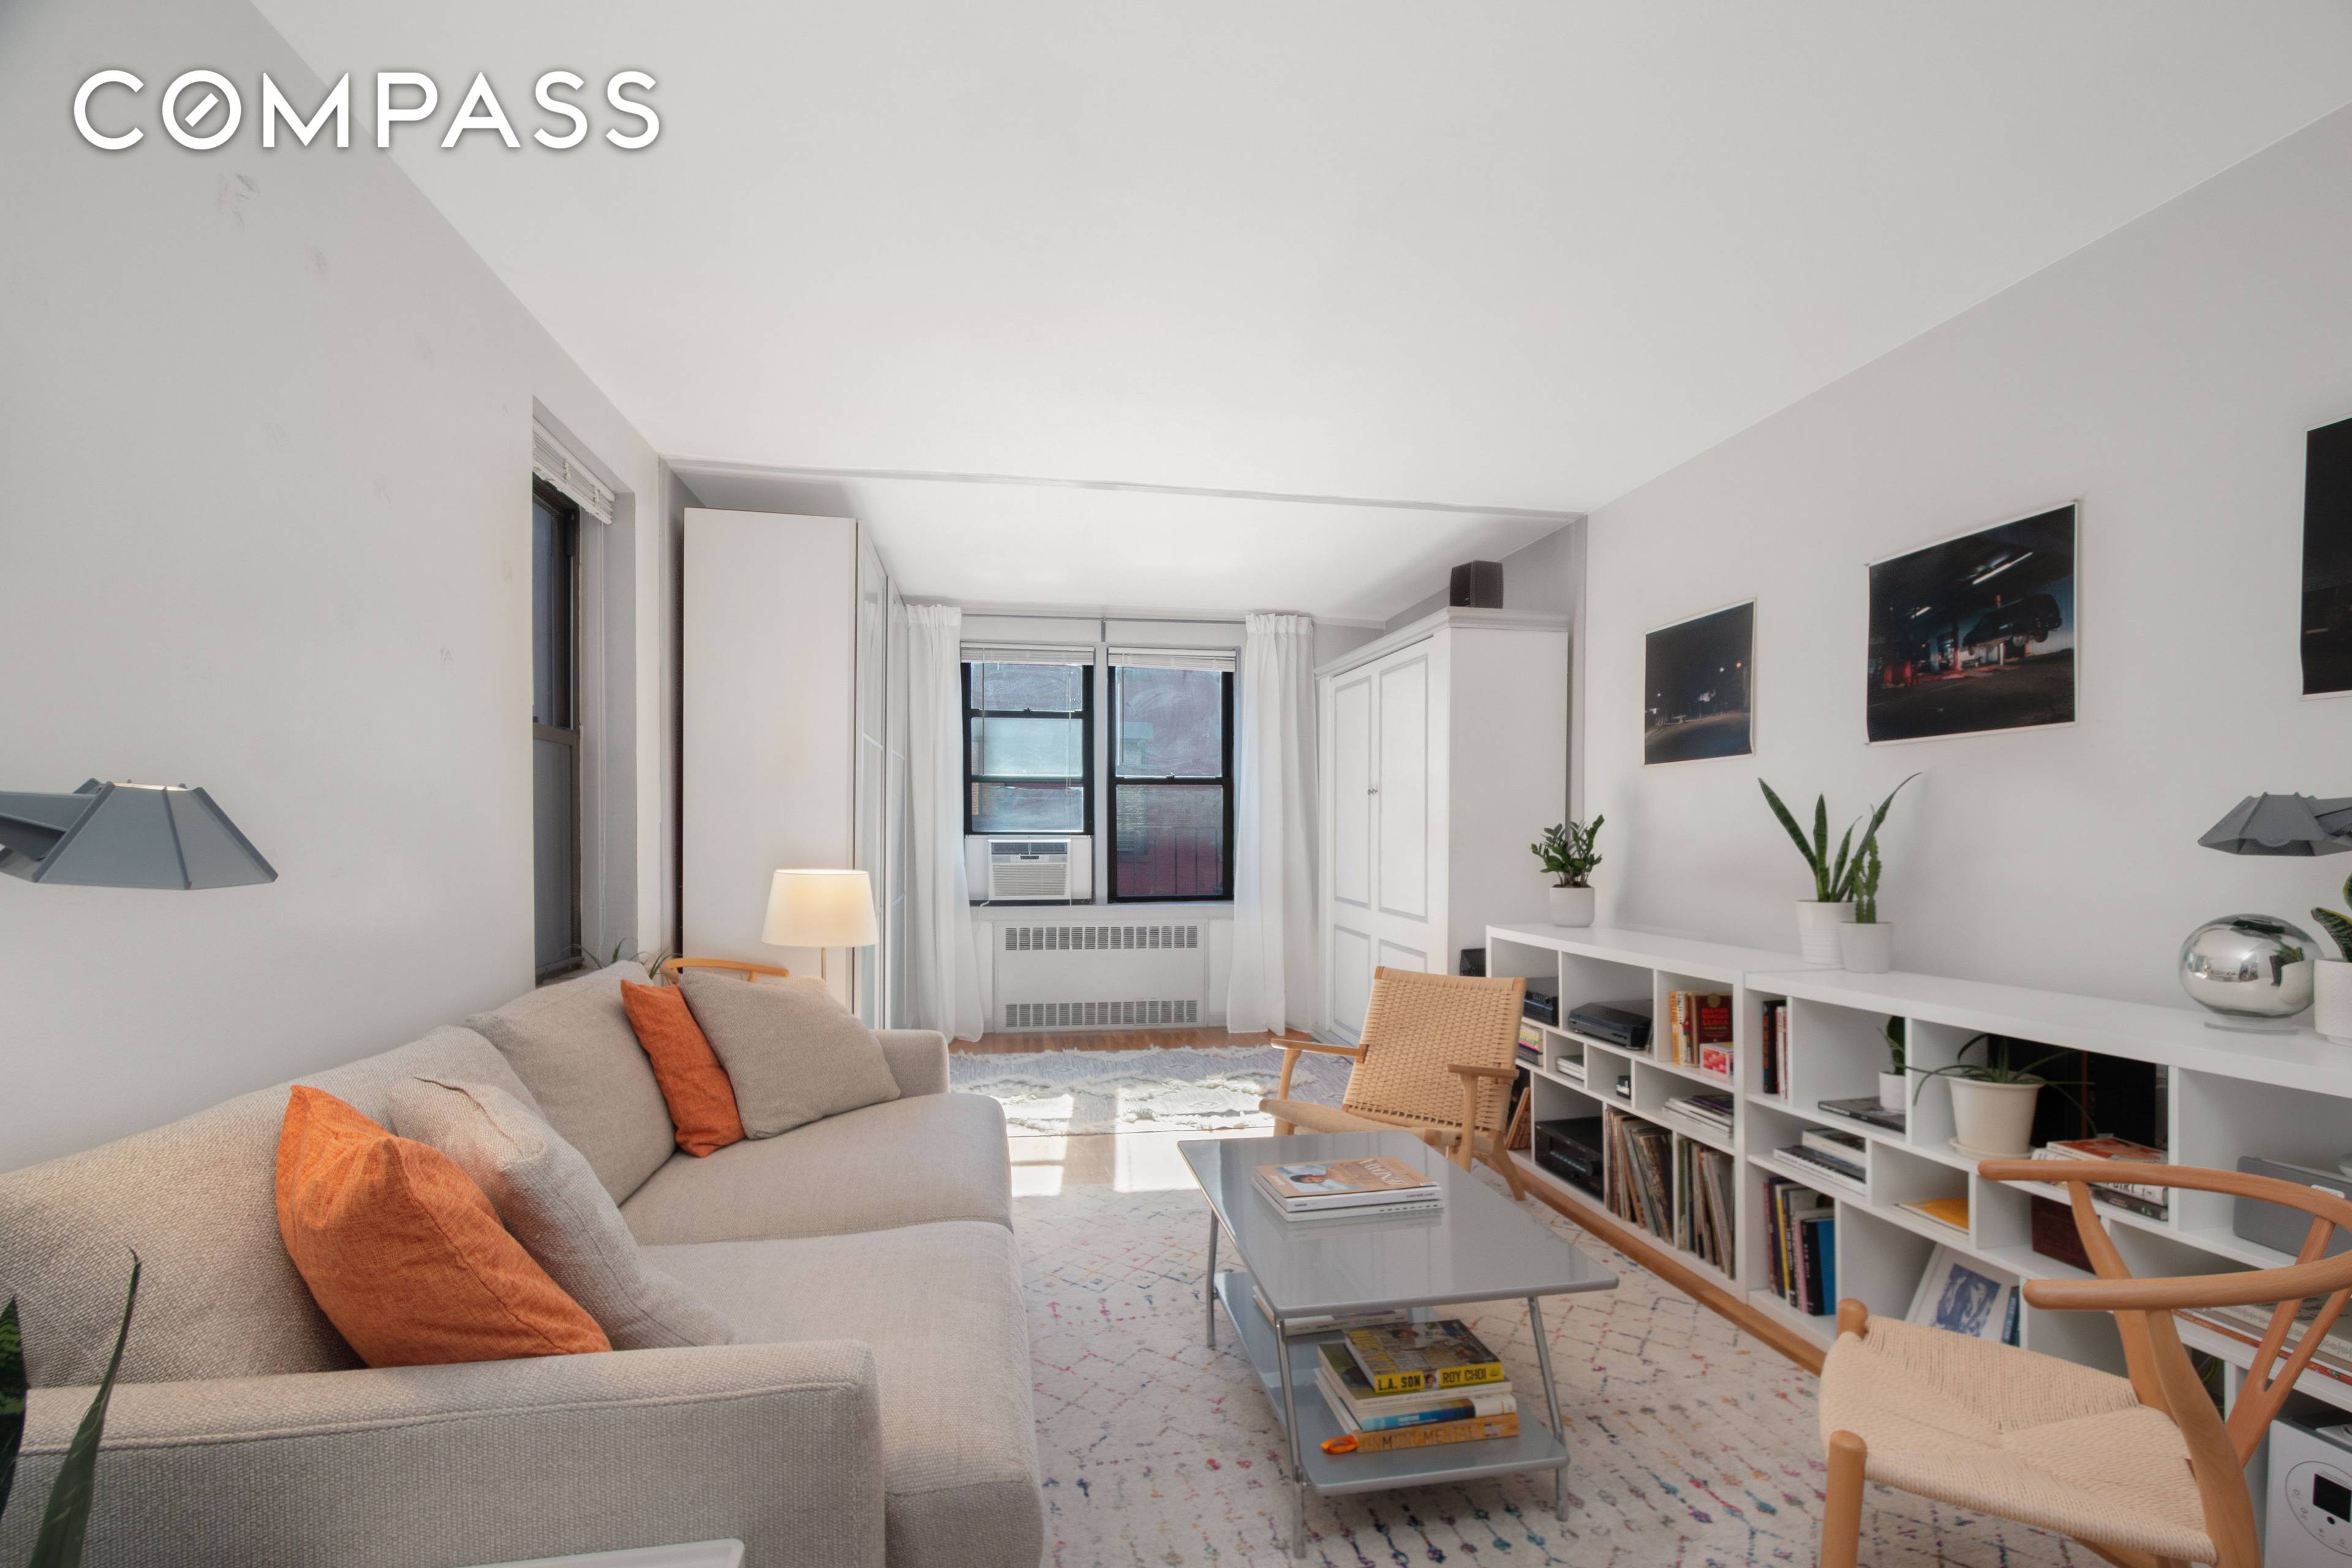 Sunfilled and quiet South facing oversized studio home located at 50 54 East 8th Street, an immaculately kept elevator cooperative in the heart of Greenwich Village.